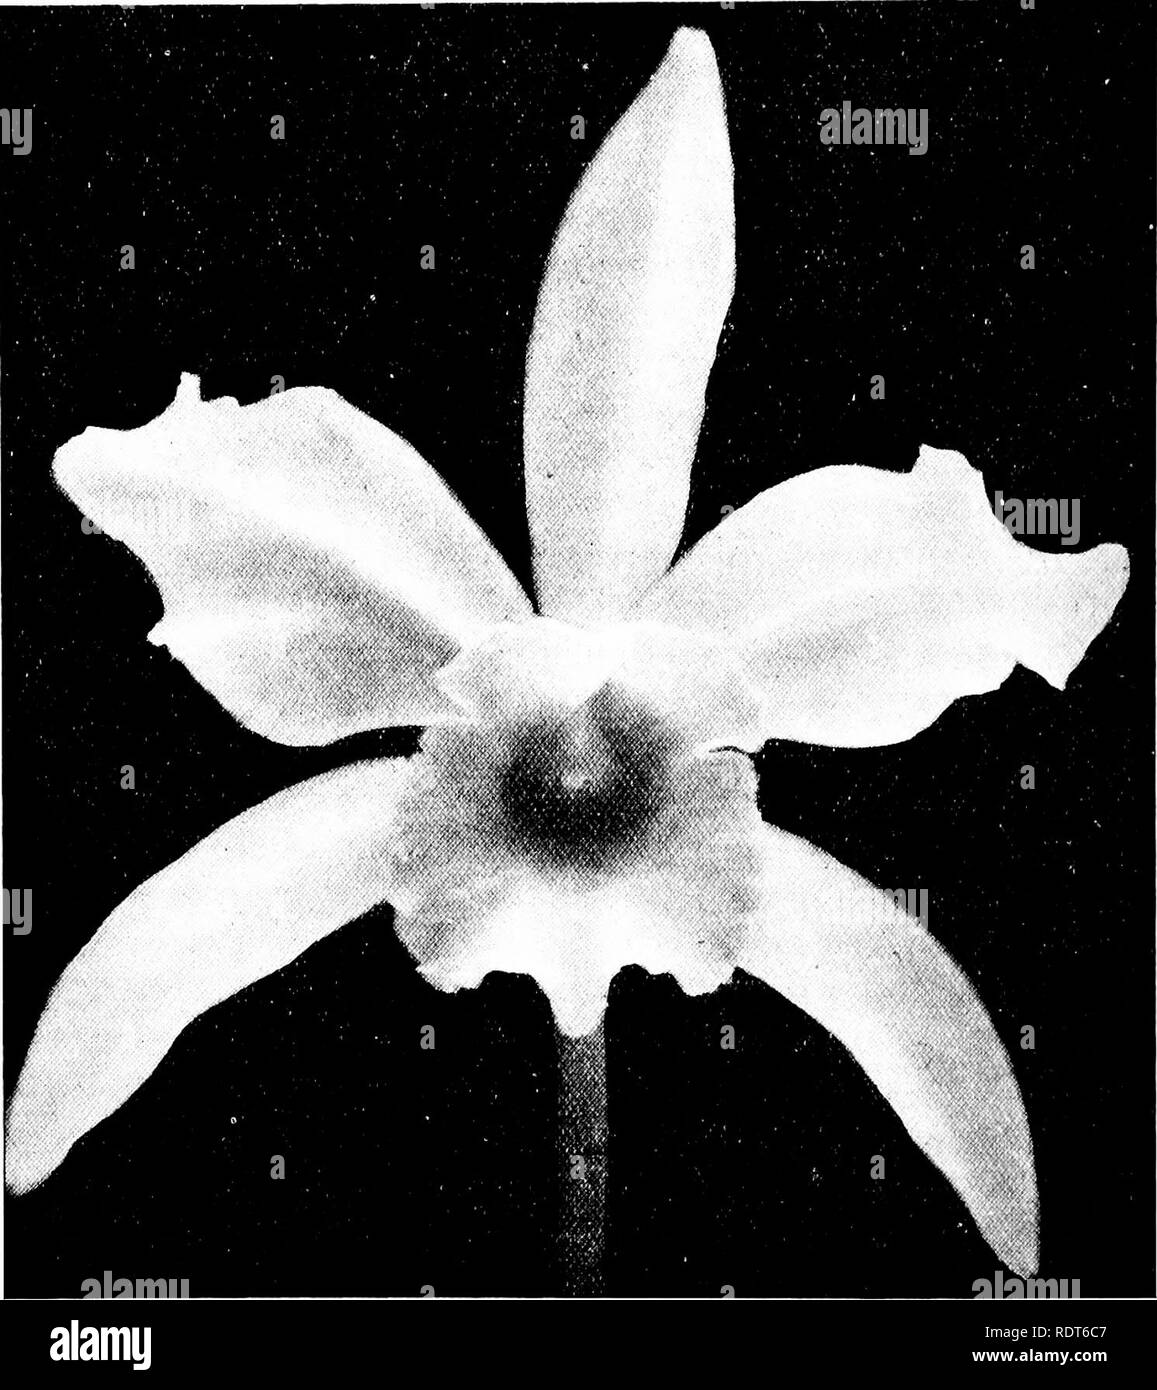 . The orchid stud-book: an enumeration of hybrid orchids of artificial origin, with their parents, raisers, date of first flowering, references to descriptions and figures, and synonymy. With an historical introduction and 120 figures and a chapter on hybridising and raising orchids from seed. Orchids. 276 THE ORCHID STUD-BOOK. [Part II. Suppl. 188b. L.-c X Perrilosa (C. granulosa x L. Perrinii), G.C. 1906, ii. 265; O.R. 1906, 338, 350, 375.—R. I. Measures, 1905. L.-c. x (unnamed), O.R. 1905, 357.—R. I. Measures. 188c. L.-c. X Perseus (C. x Minerva x L.-c. x Clive), O.R. 1905, 23; 1906, 29.—Ch Stock Photo